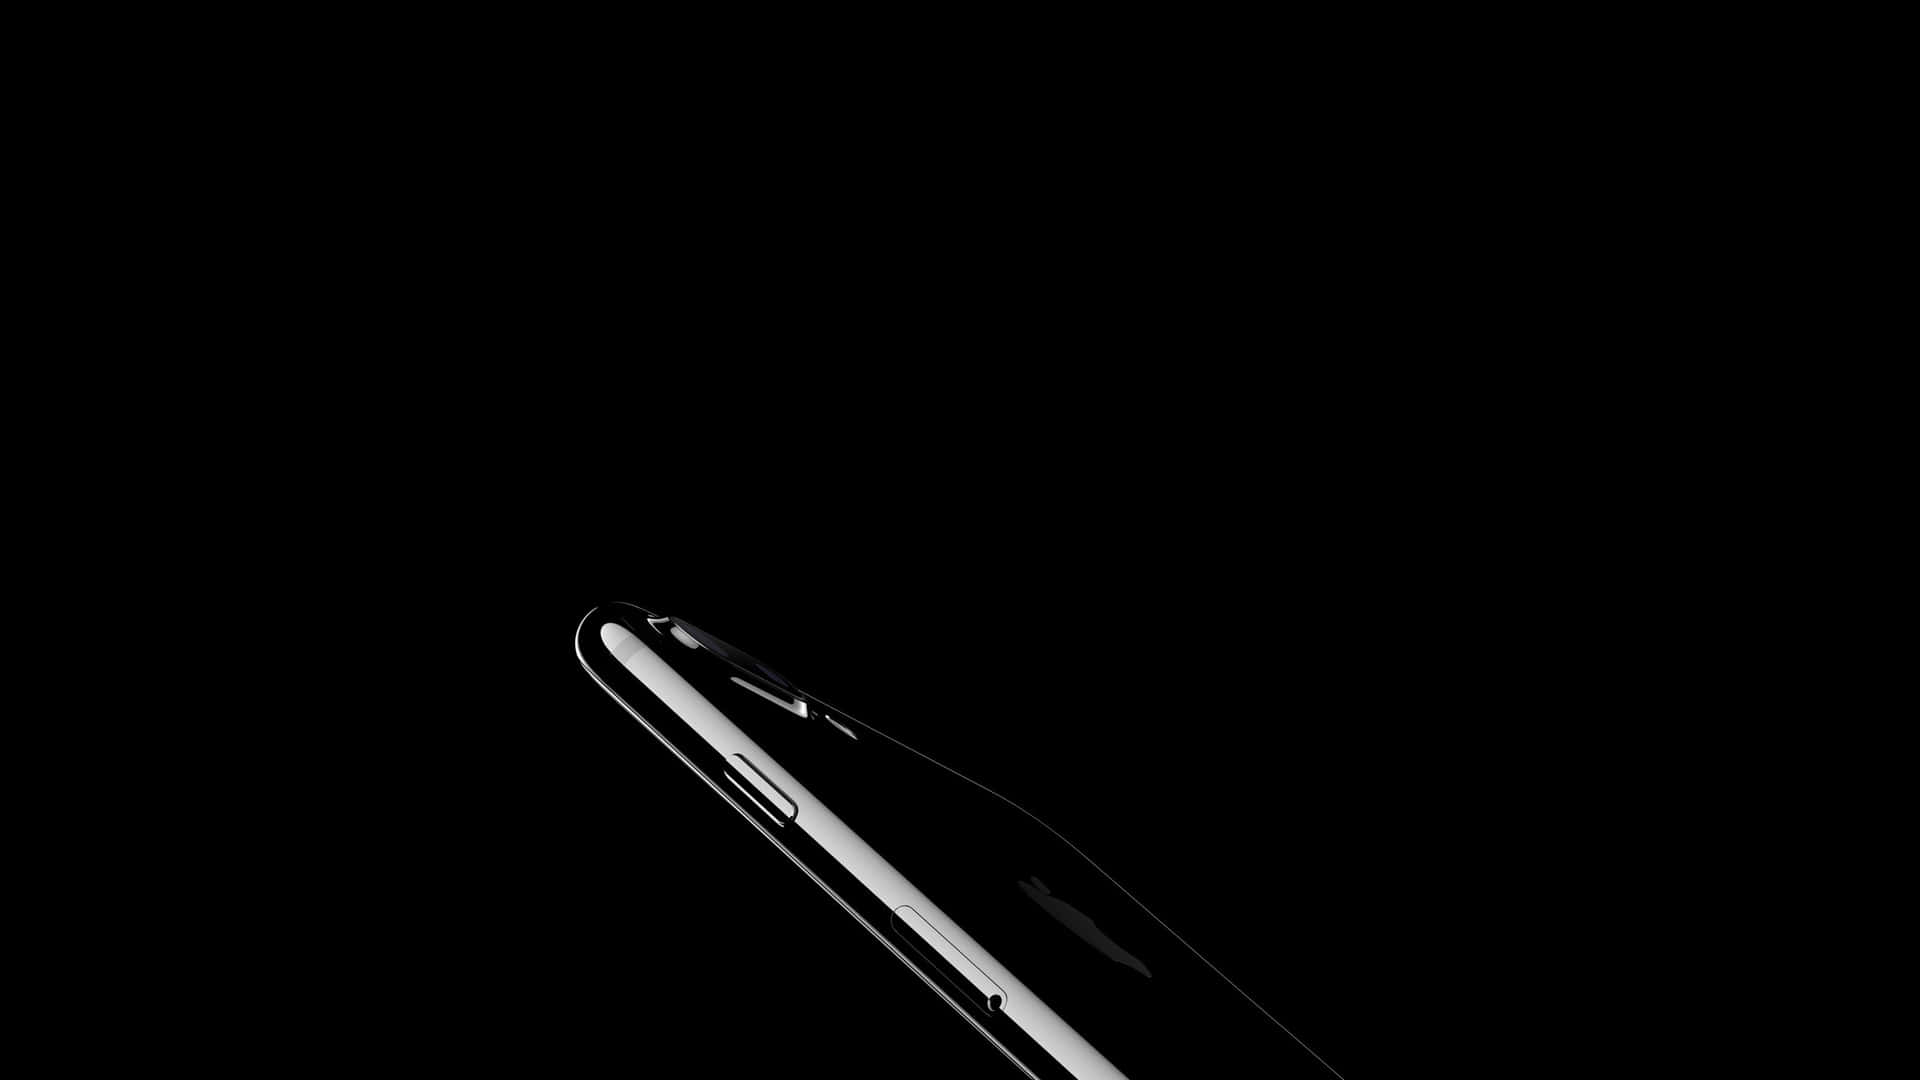 An Iphone Is Shown In A Black Background Wallpaper